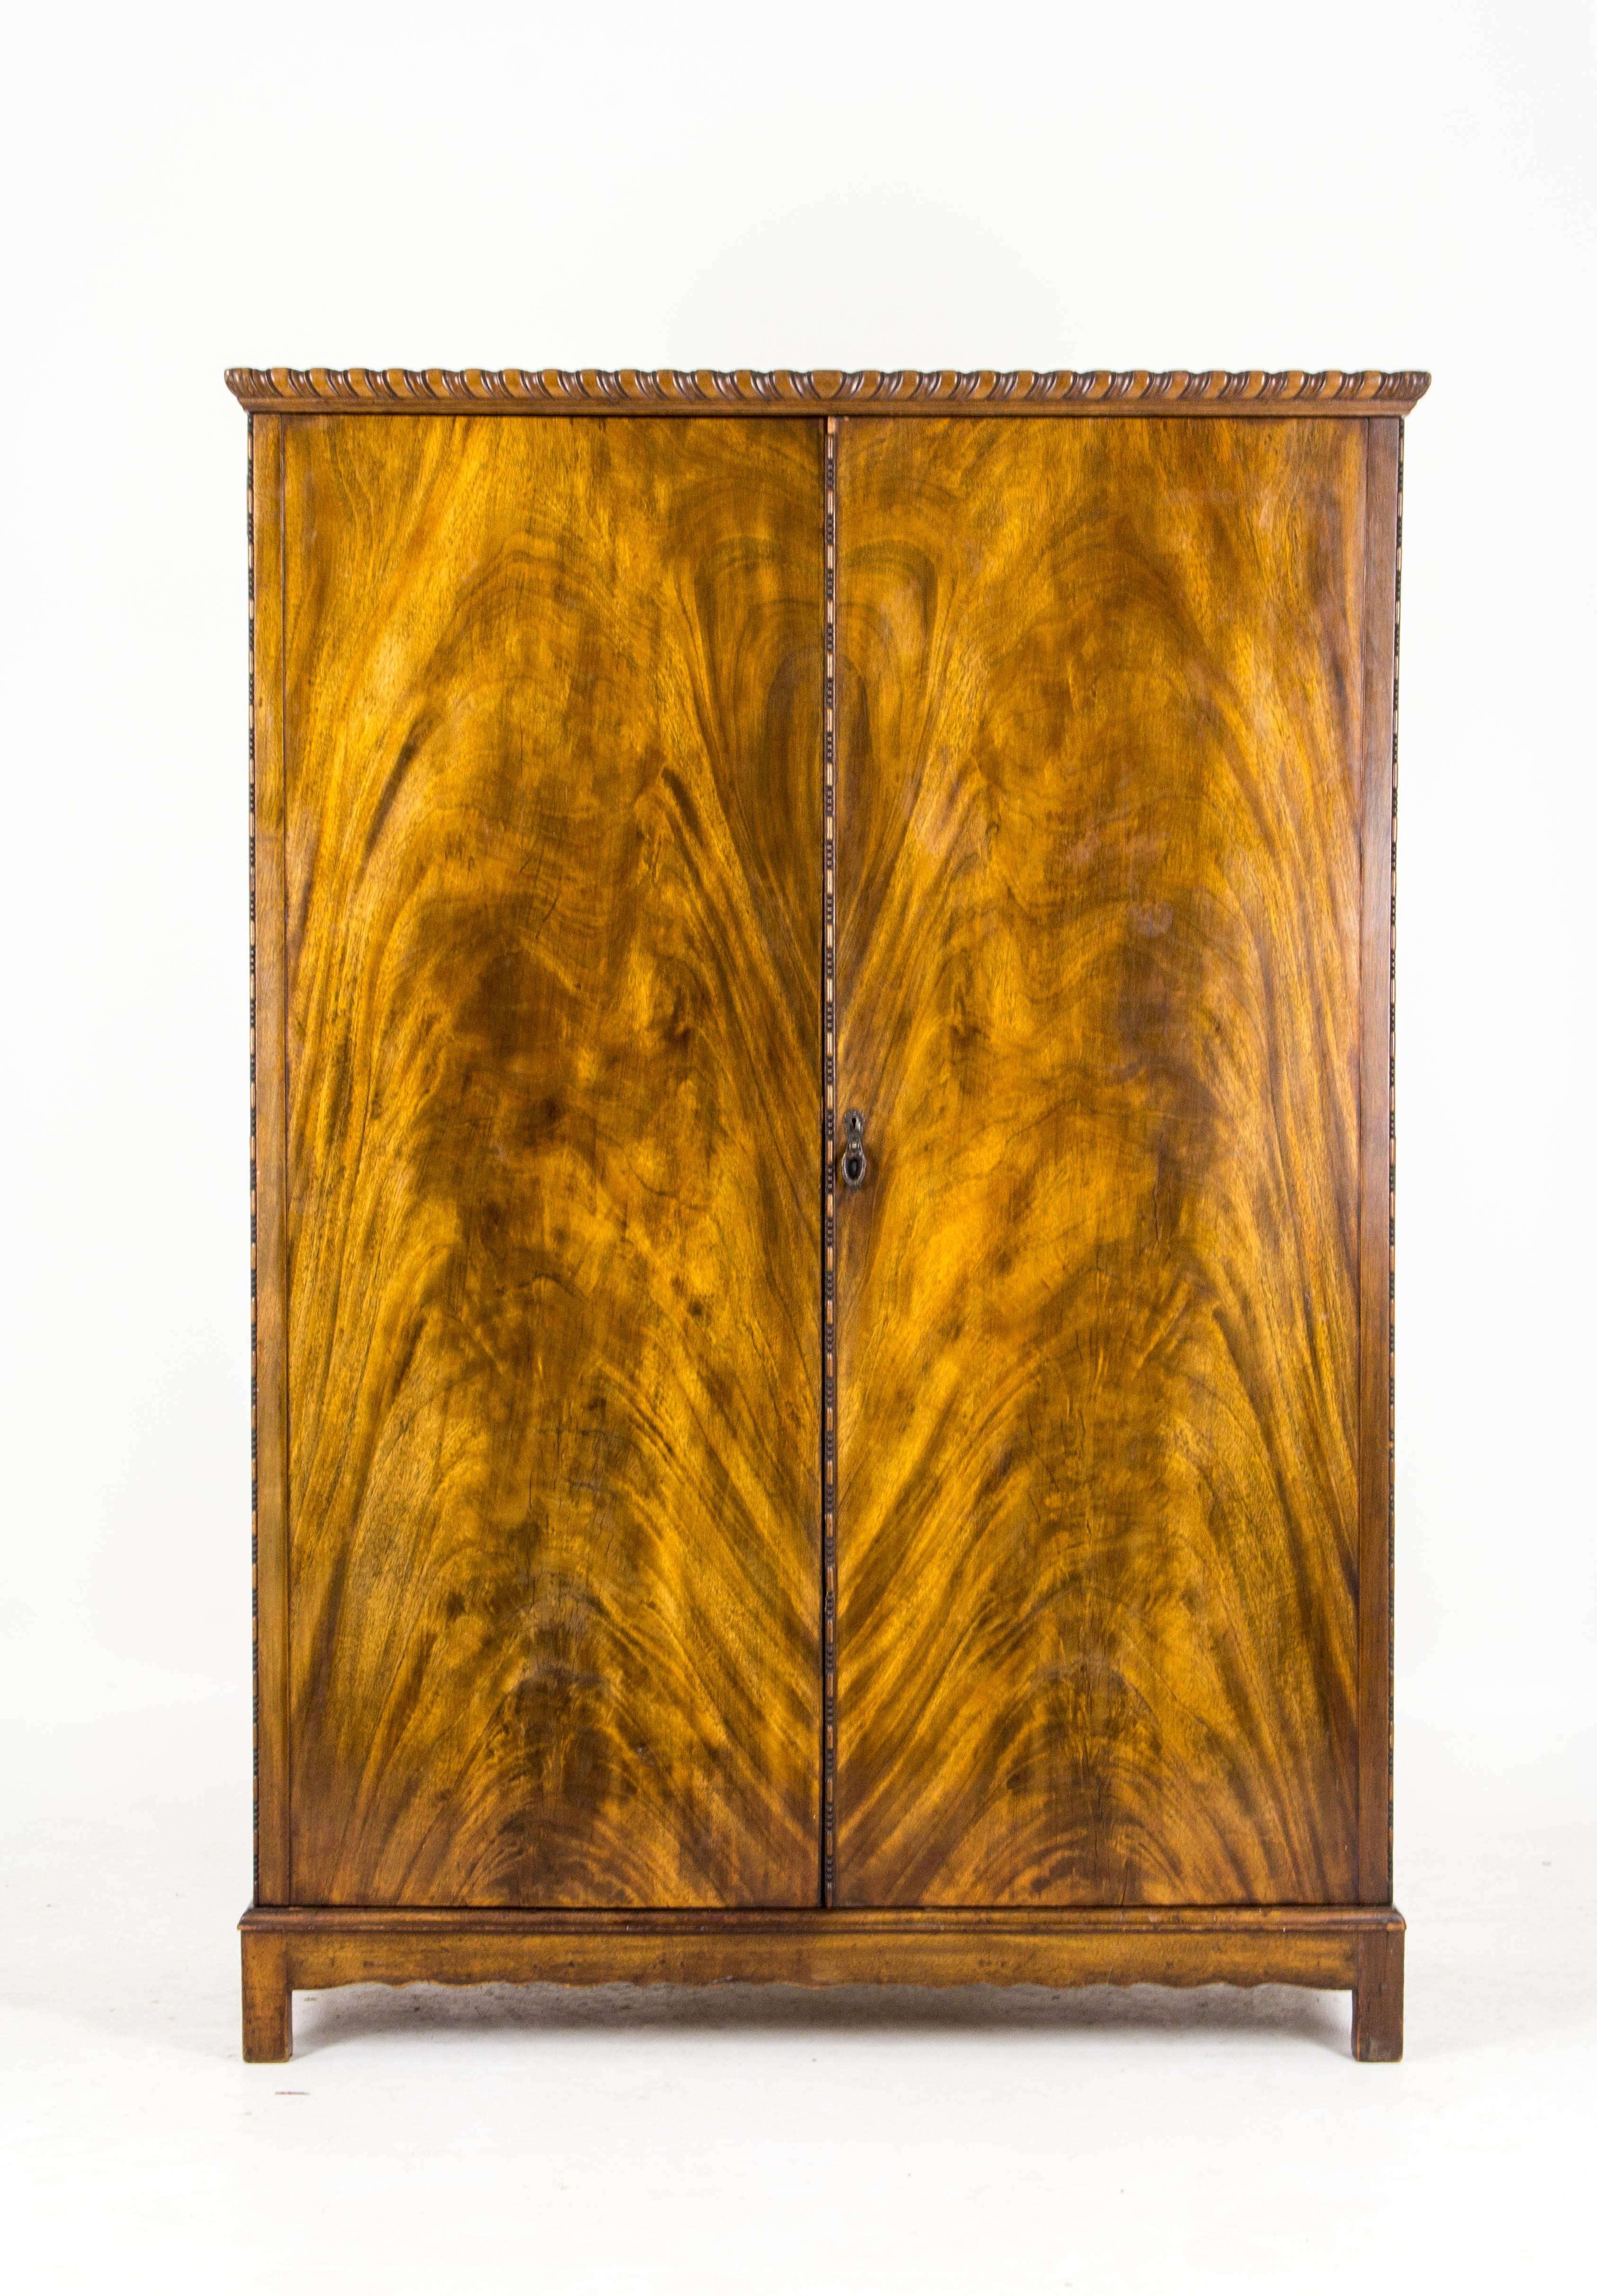 B557 antique Scottish flamed mahogany fitted armoire wardrobe, closet.

Scotland, 1930s
Original finish
Solid mahogany and veneers
Wonderful burr walnut
Two doors enclosed with hanging space, other side with a bank of slide out drawers
Nice